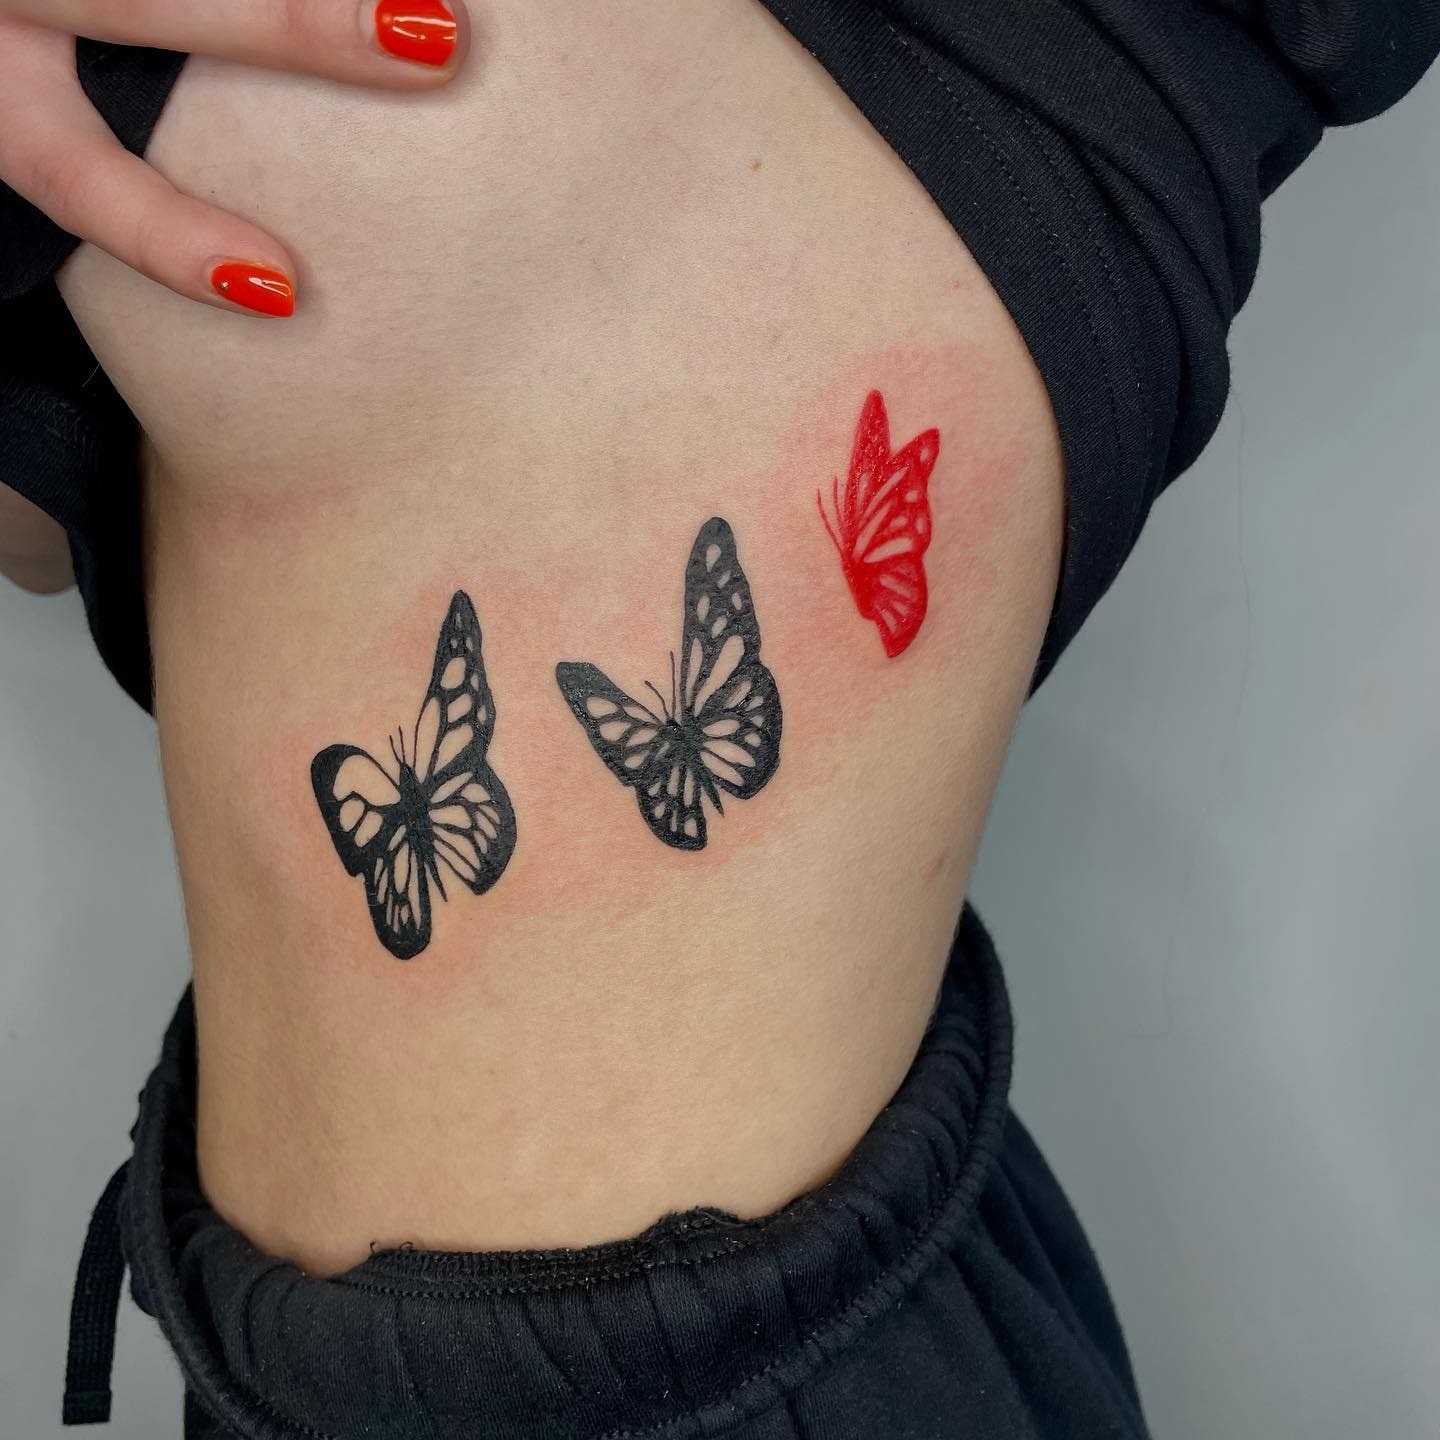 Red and black butterflies tattoo on ribs